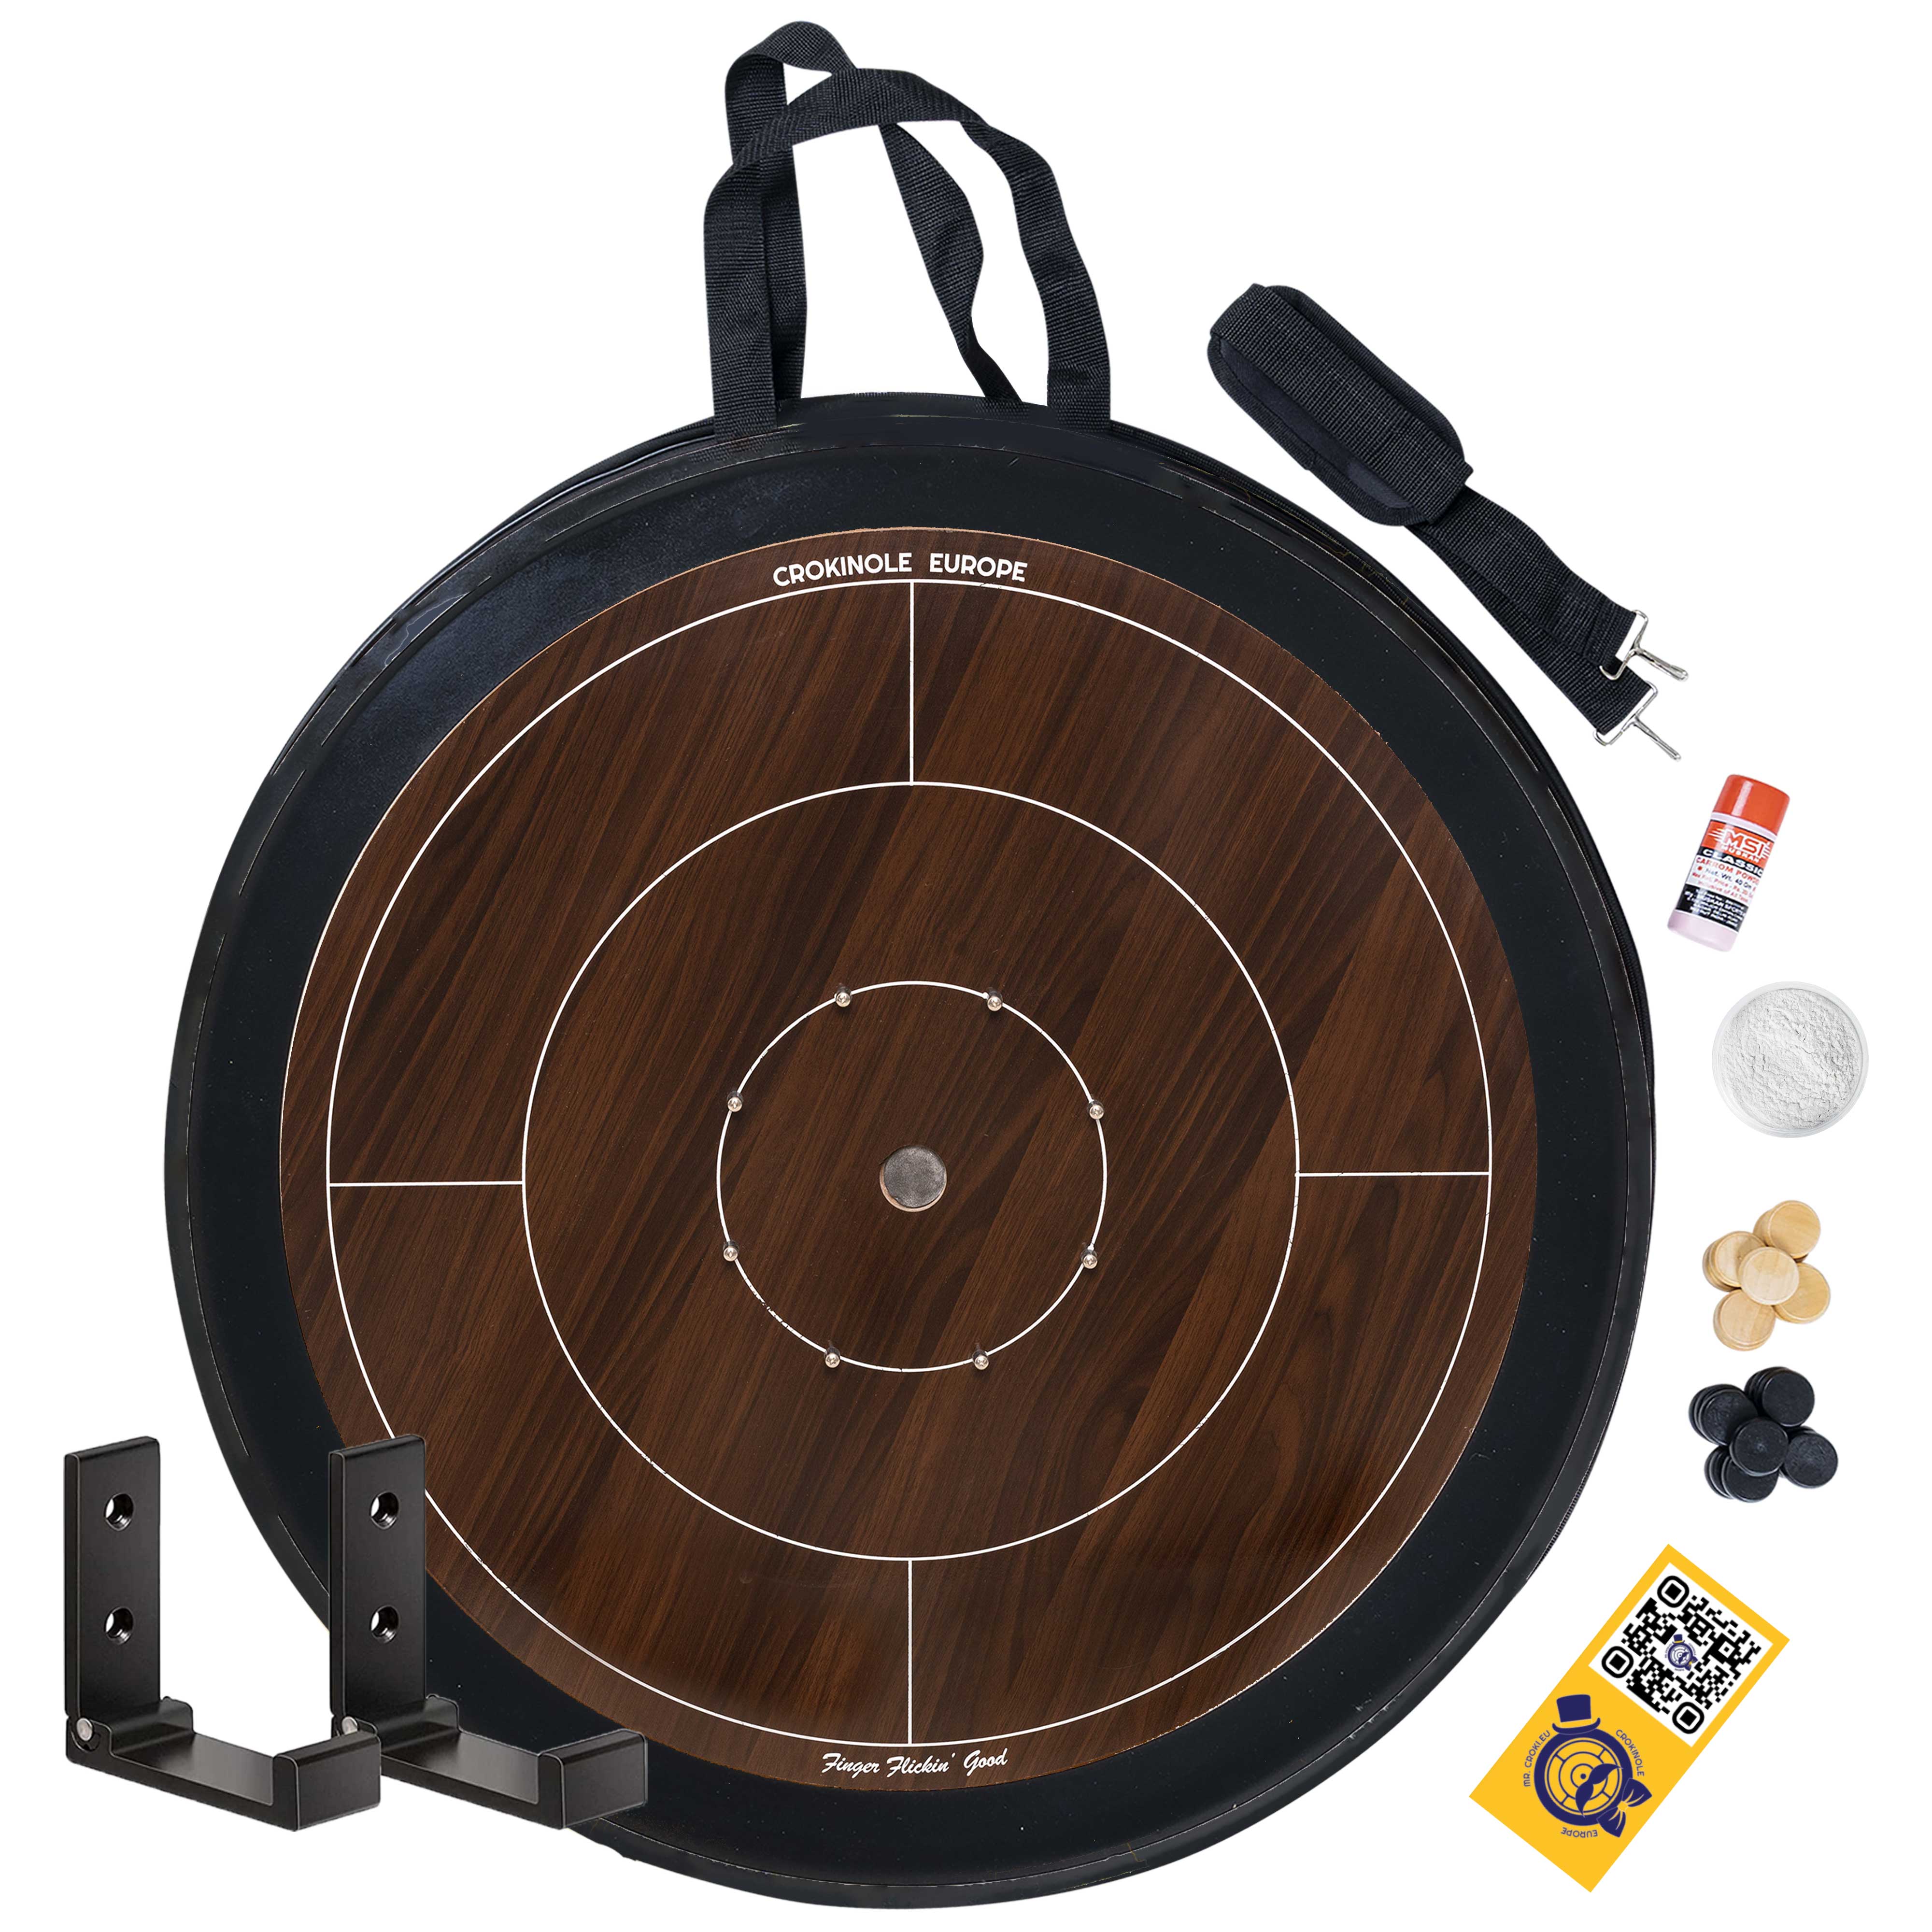 Crokinole Board Game - 'dark' Tournament Board, 26 Discs, Carrom Powder, Carrying Bag - Official Dimensions - Strategic Game for Young and Old - Buy Crokinole - Crokinole Europe